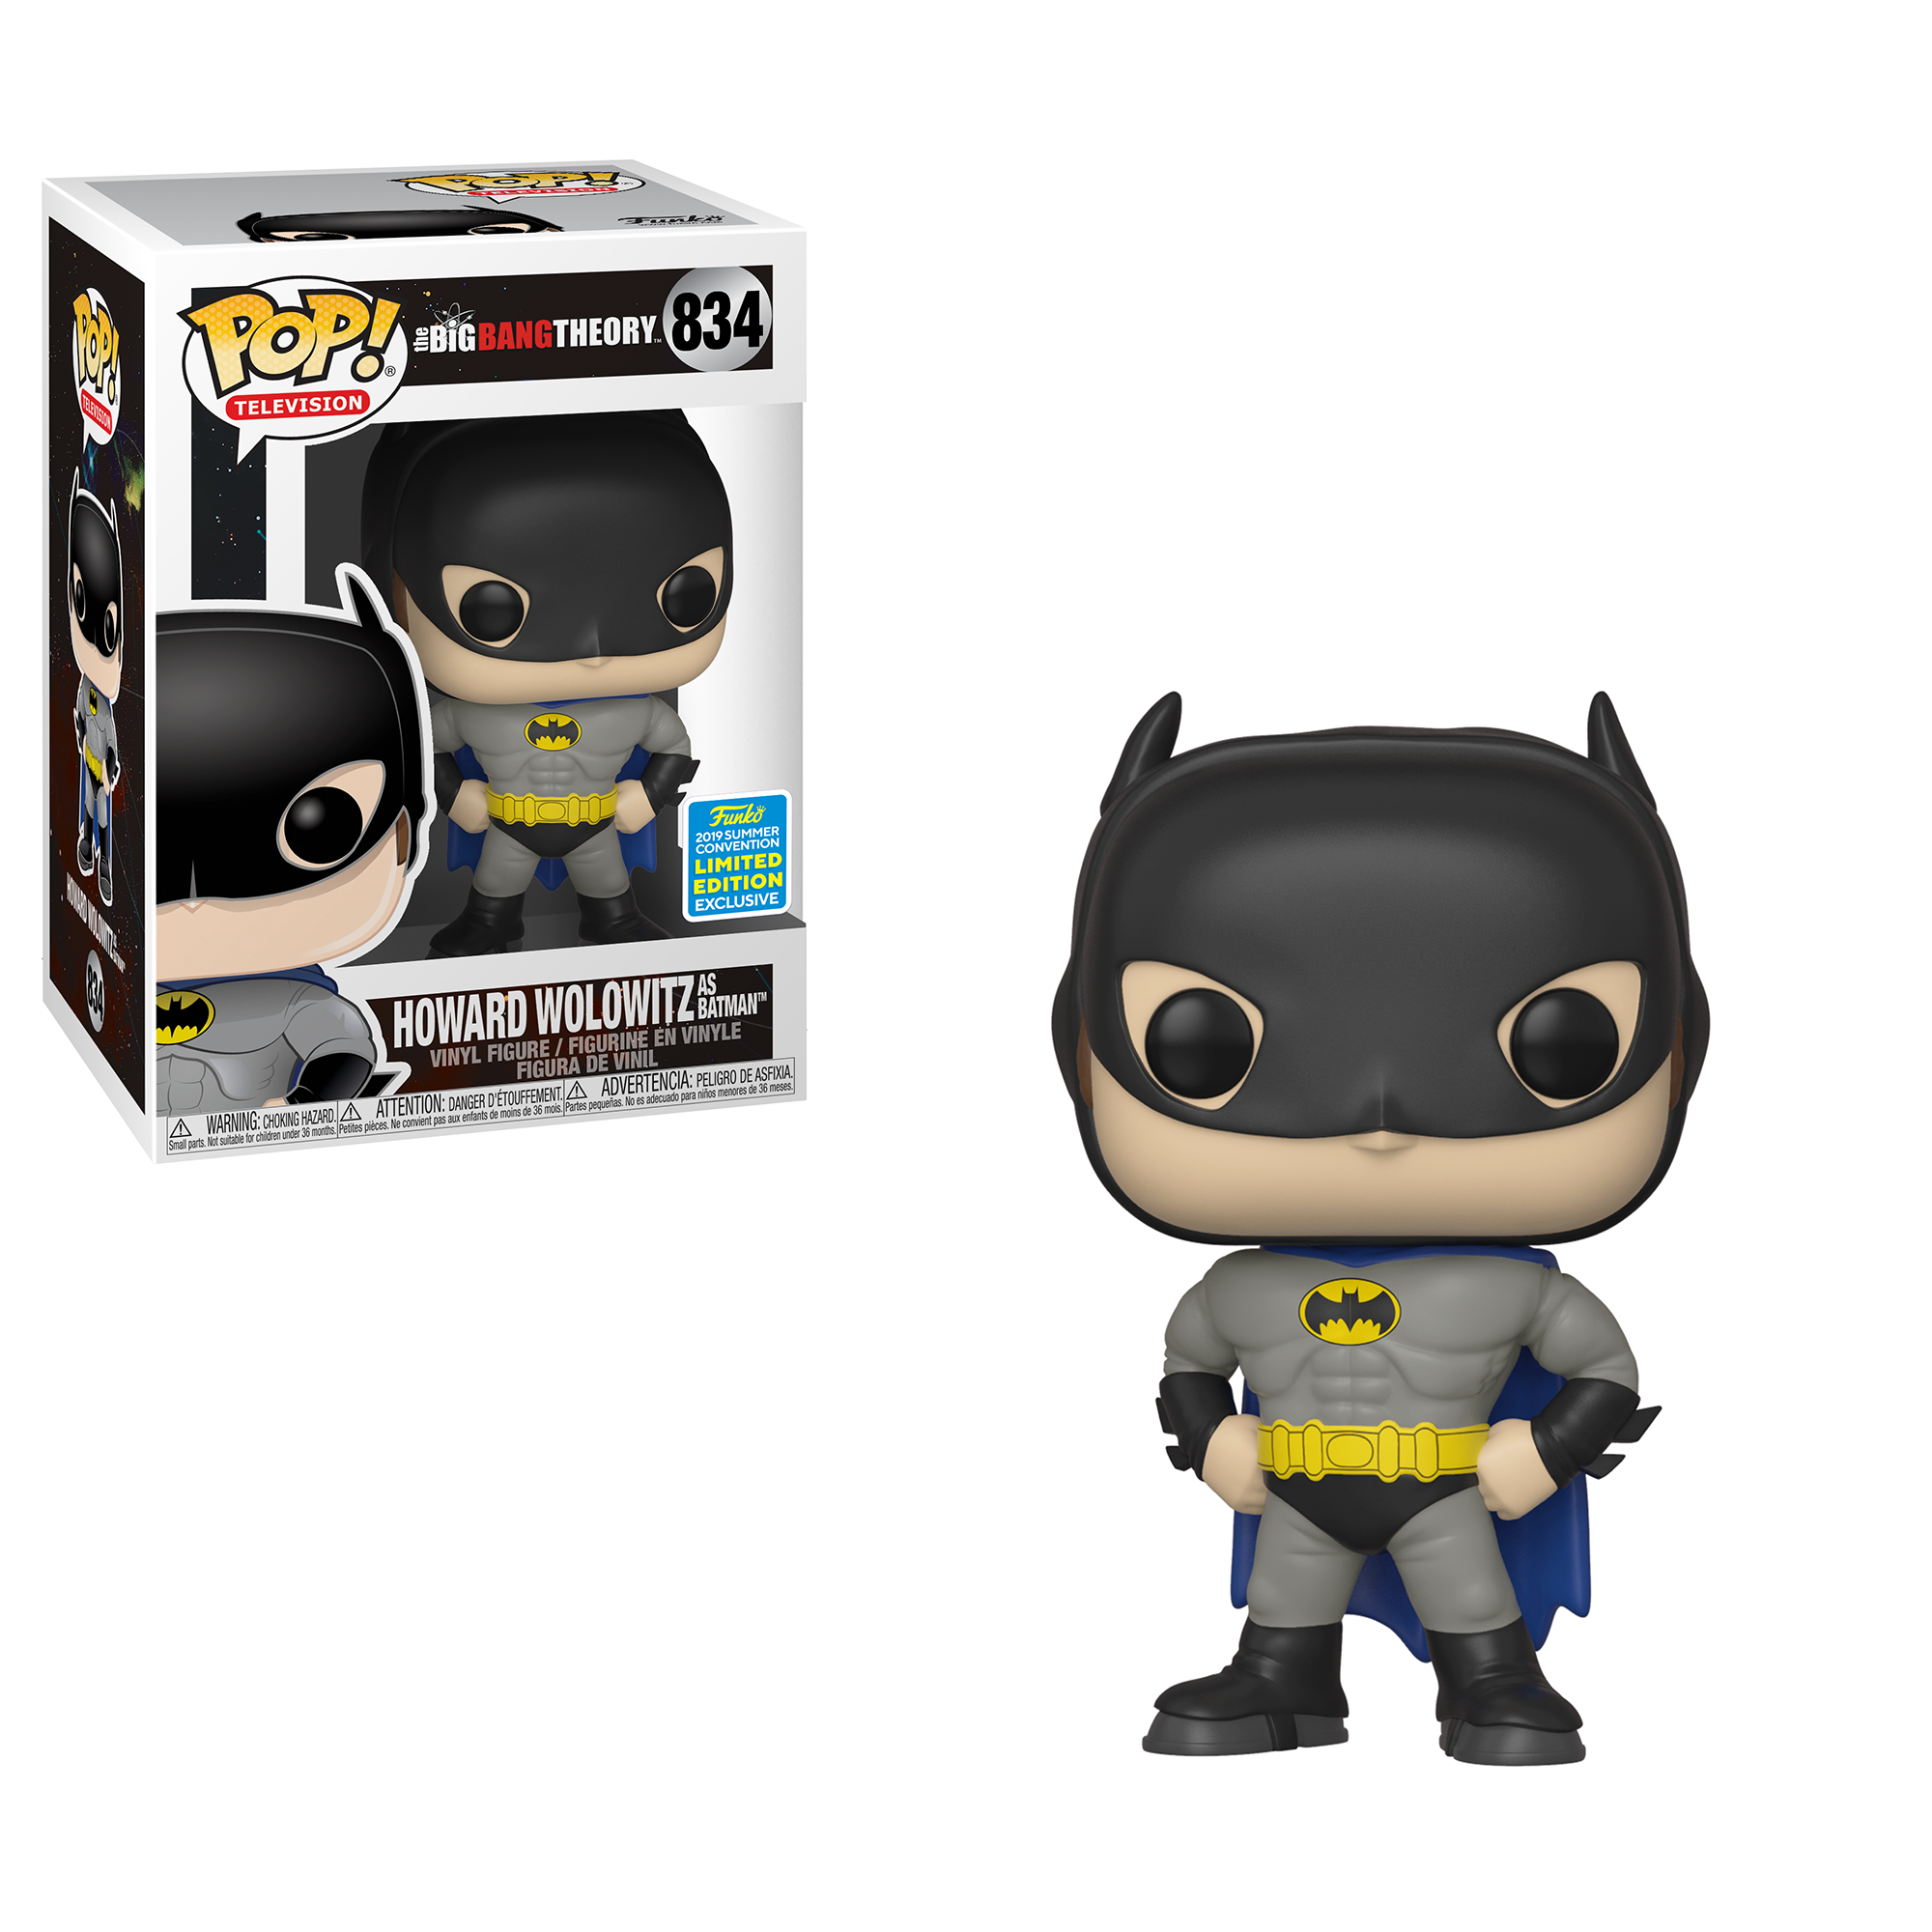 Funko POP TV: Big Bang Theory - Howard as Batman (Justice League Halloween) - Summer Convention Exclusive - image 1 of 2